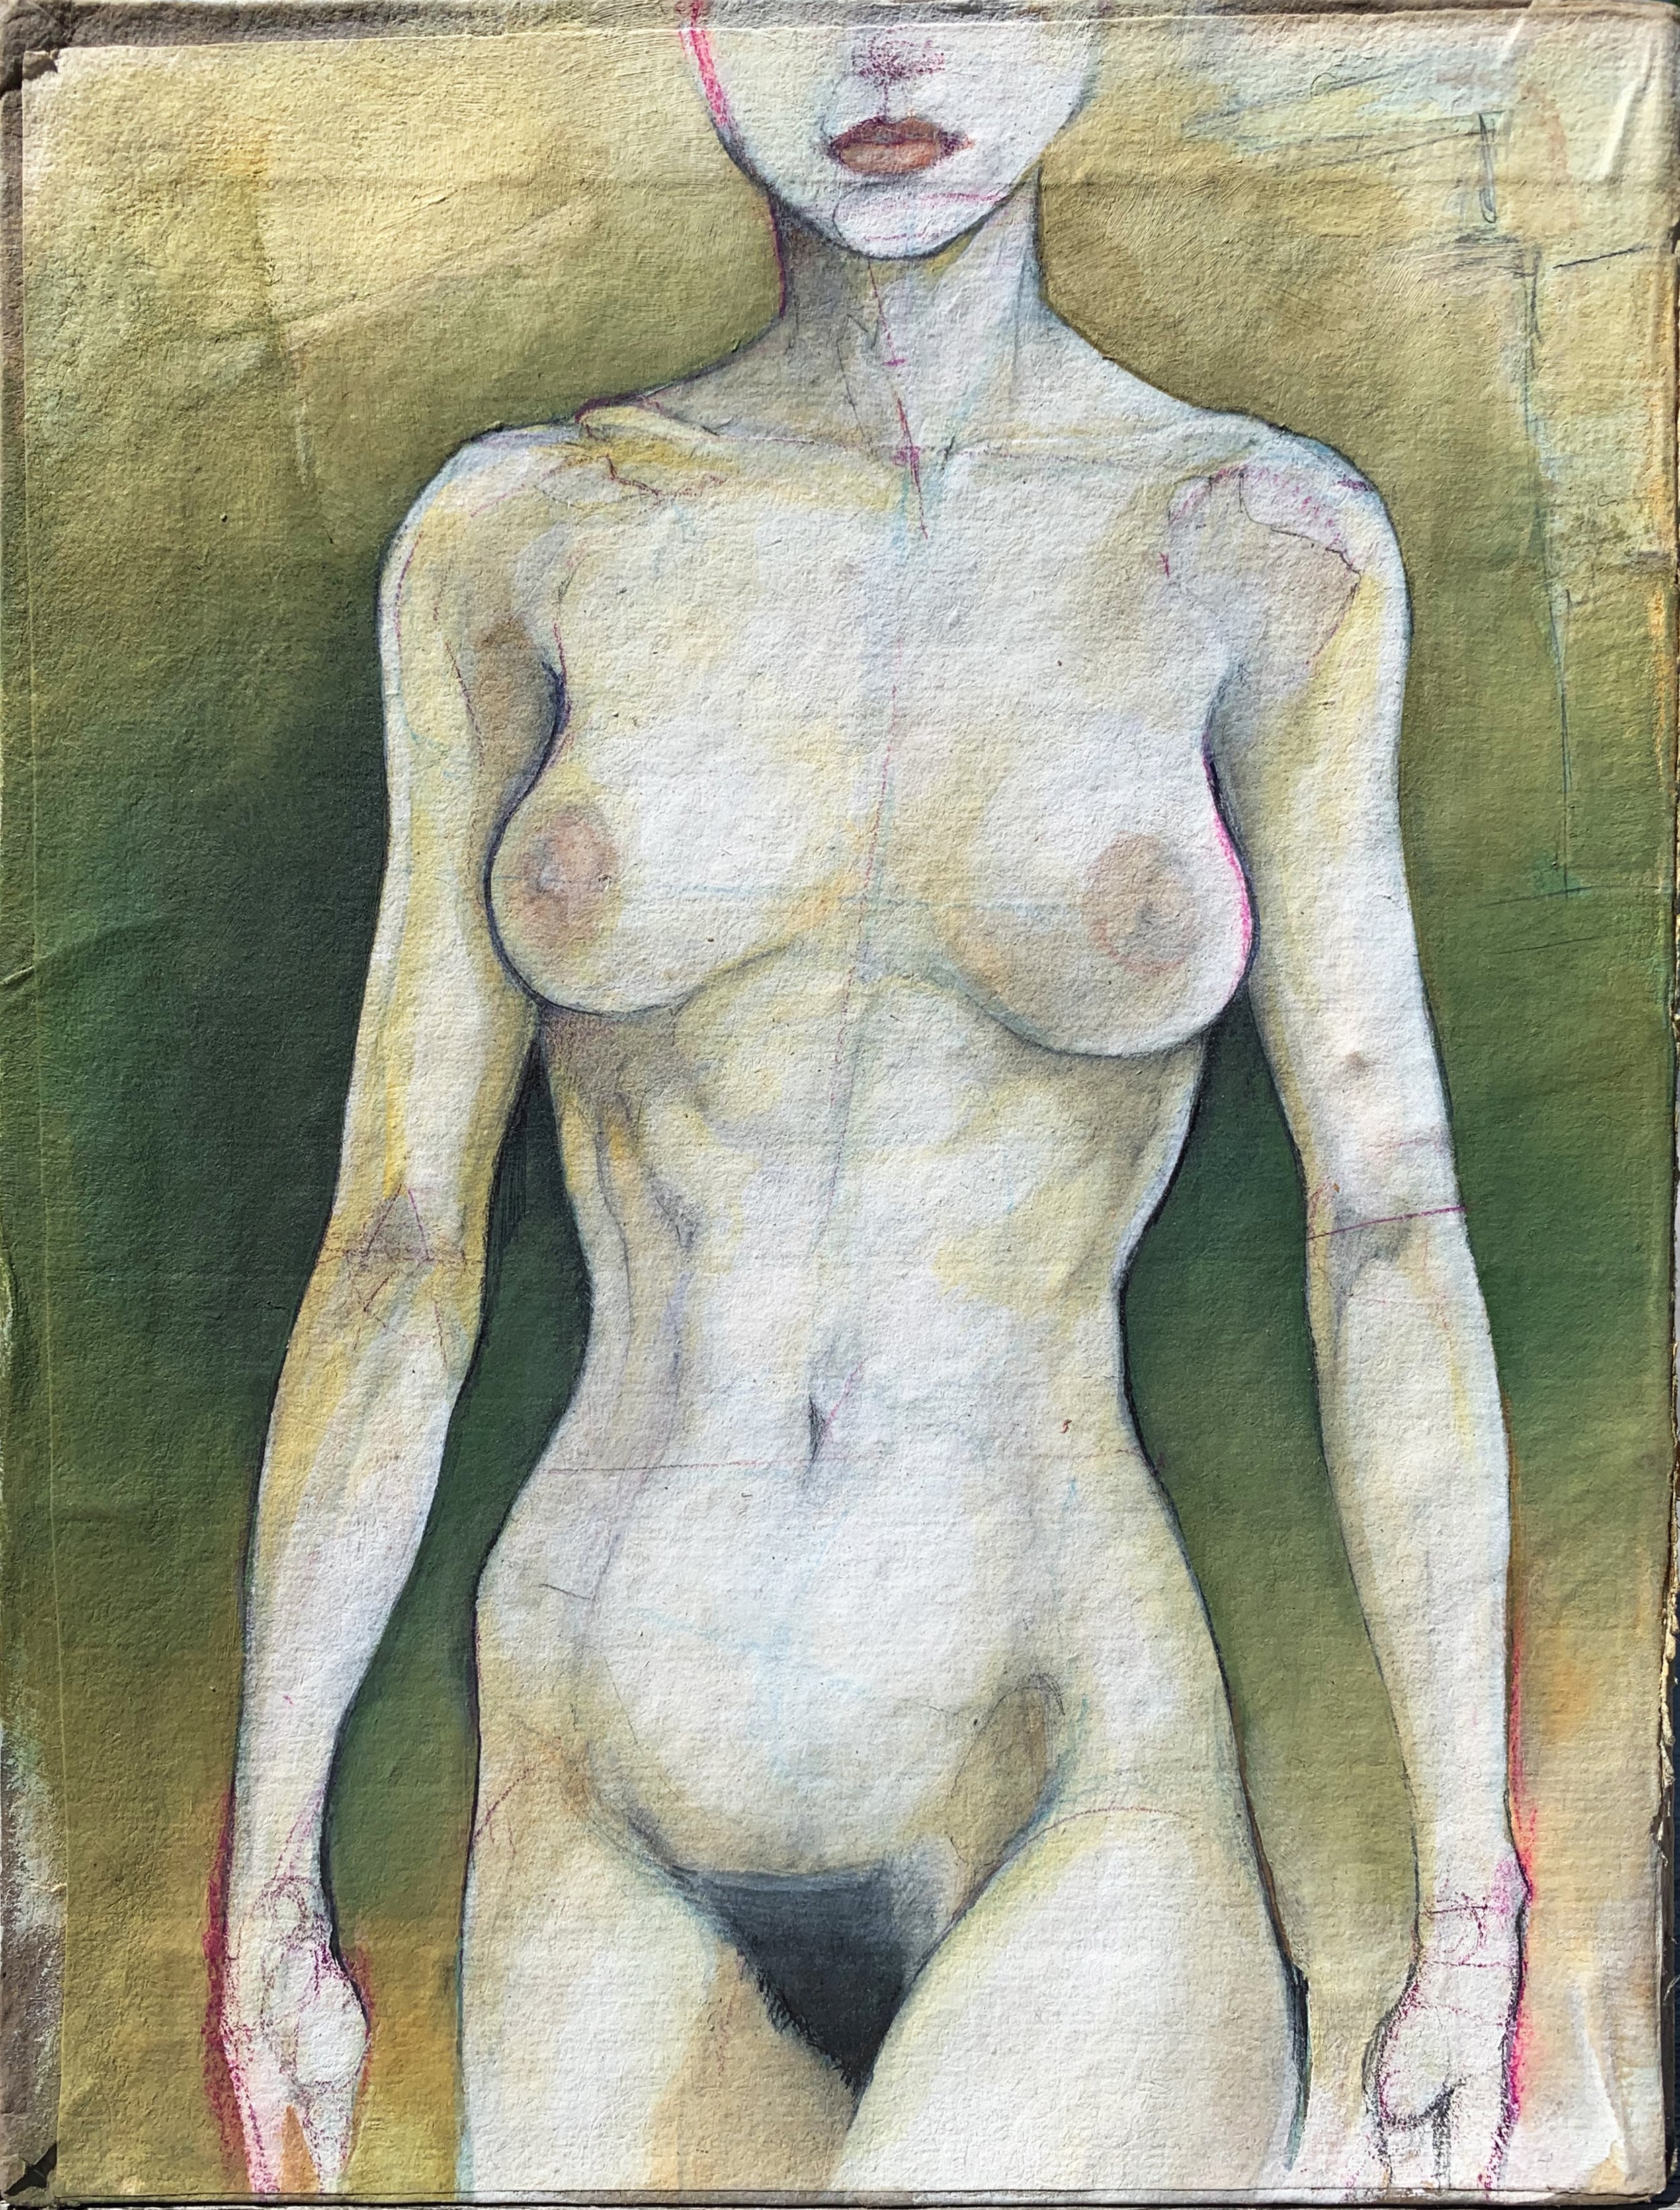   NUDE 2   7” x 9.25”  Oil on Vintage Book Cover       